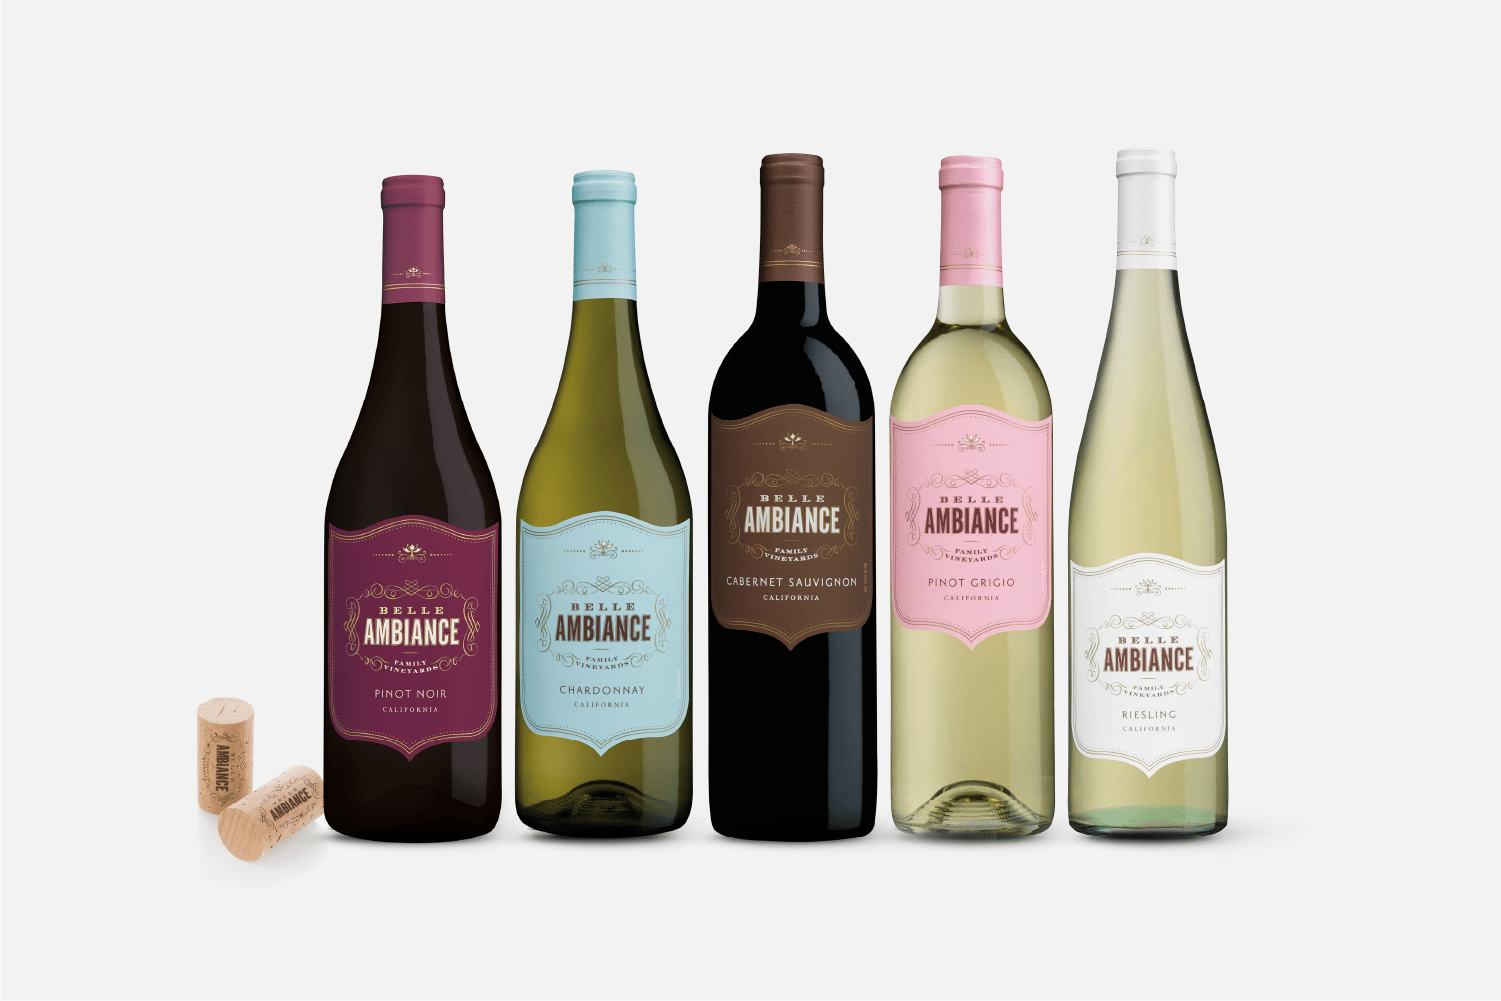 Belle Ambiance Wines by Juli Shore Design; Pinot Noir, Chardonnay, Cabernet Sauvignon, Pinot Grigio and Reisling. 